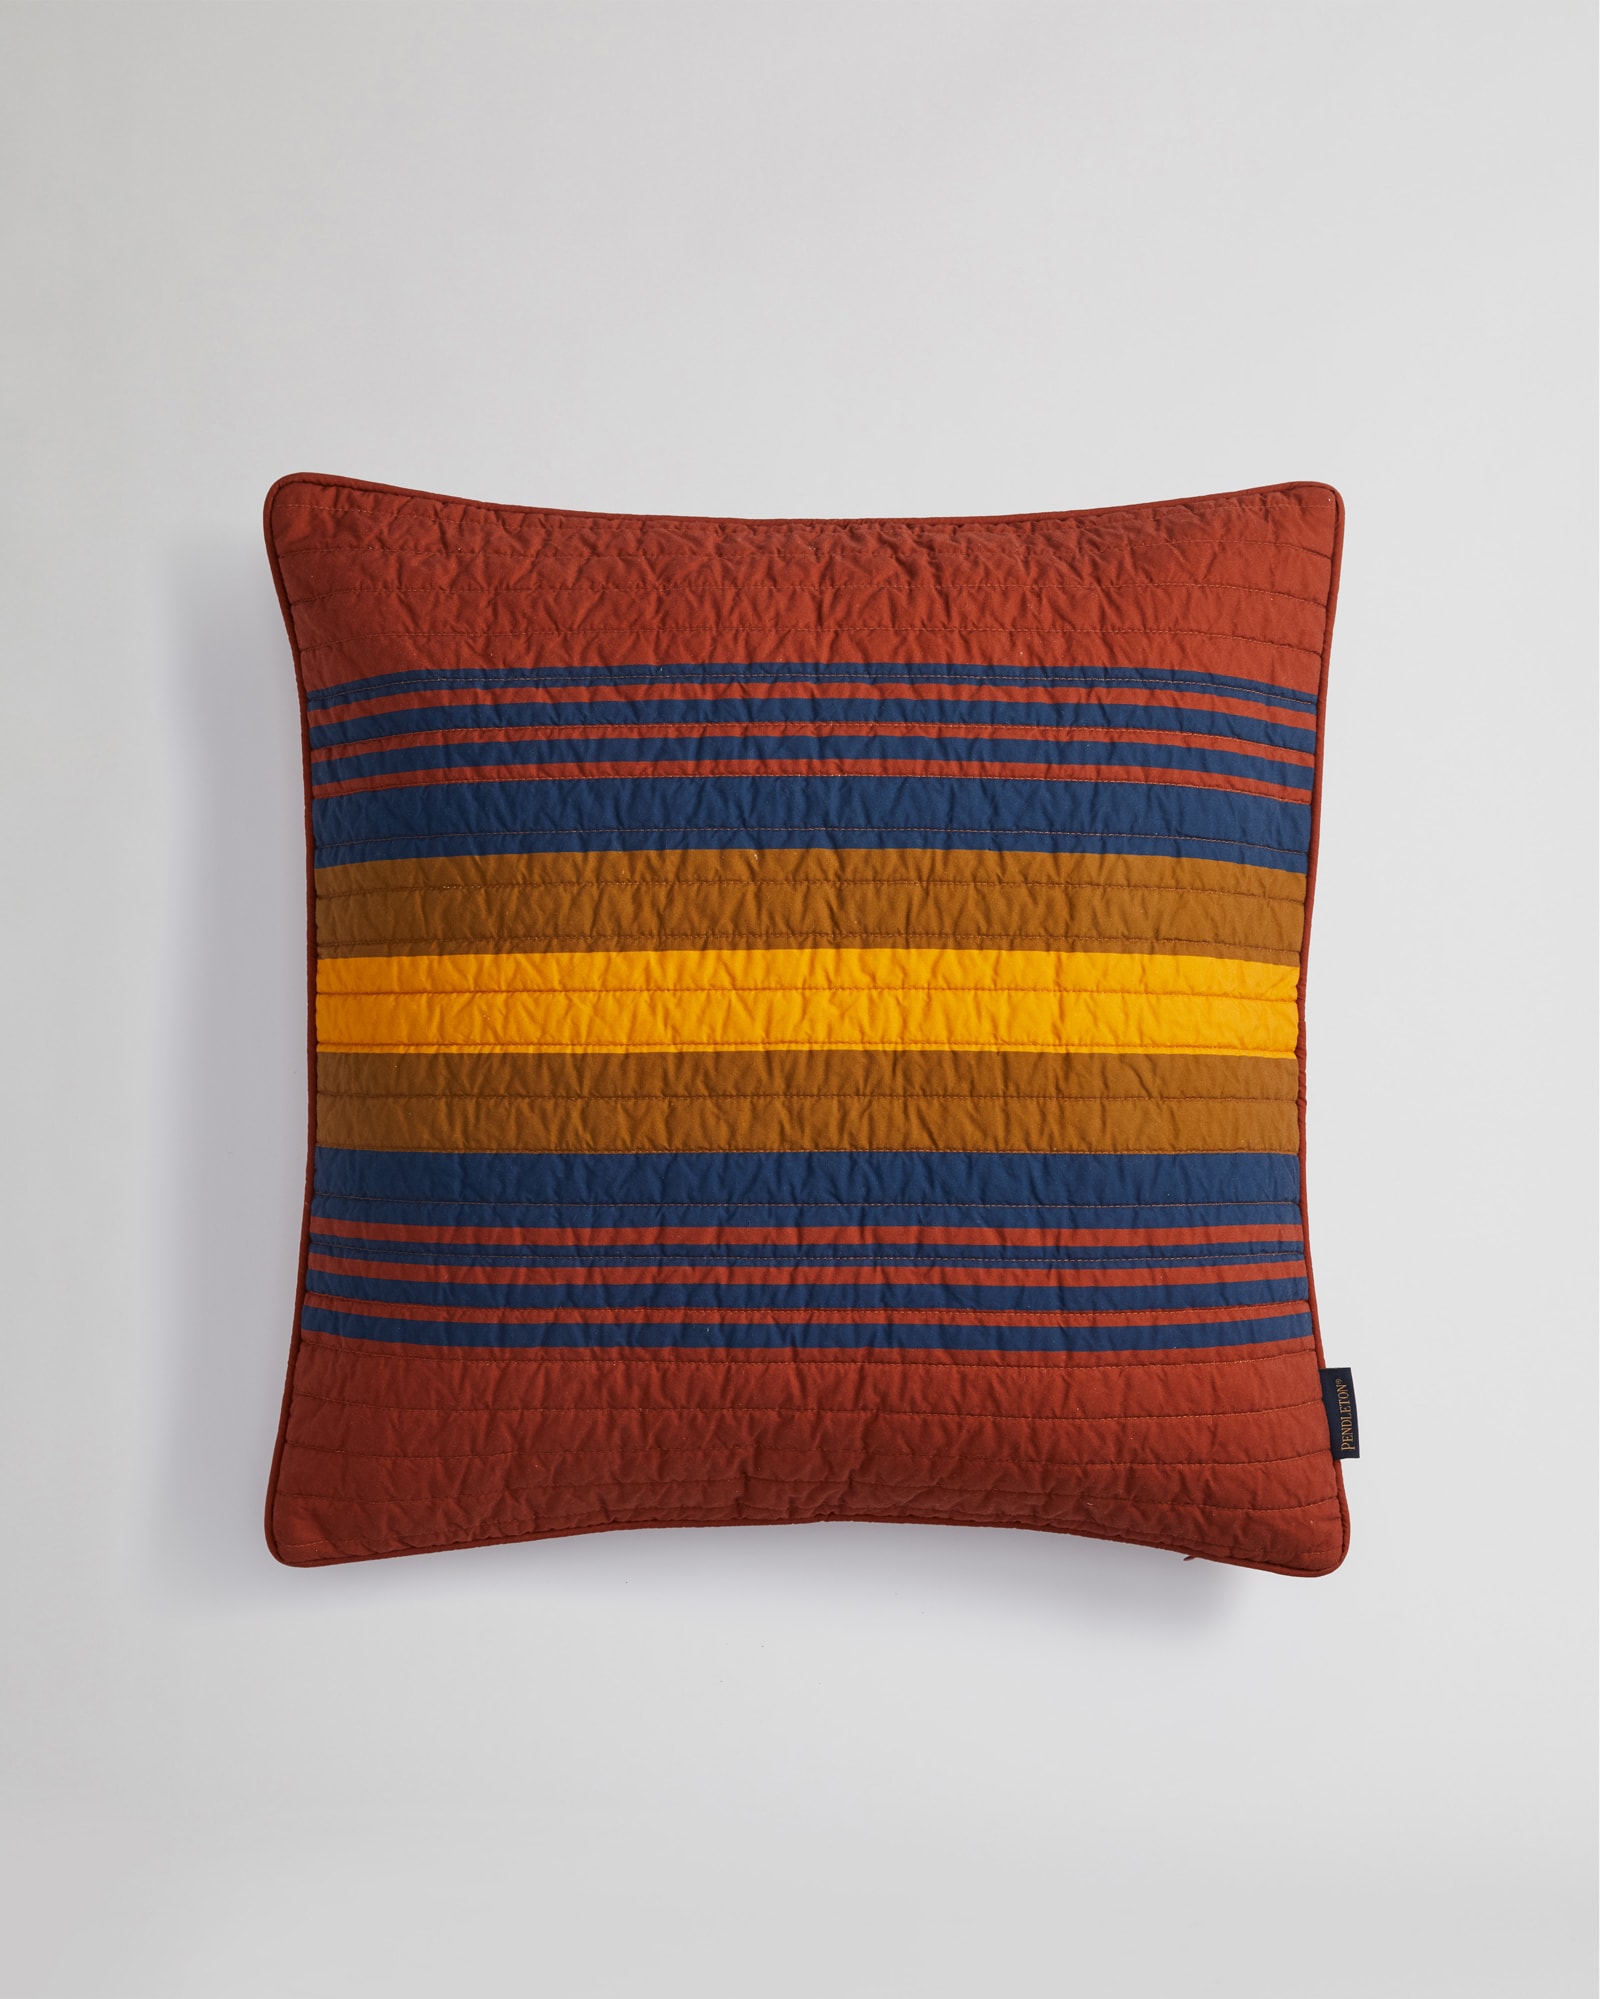 ZION NATIONAL PARK QUILTED PILLOW